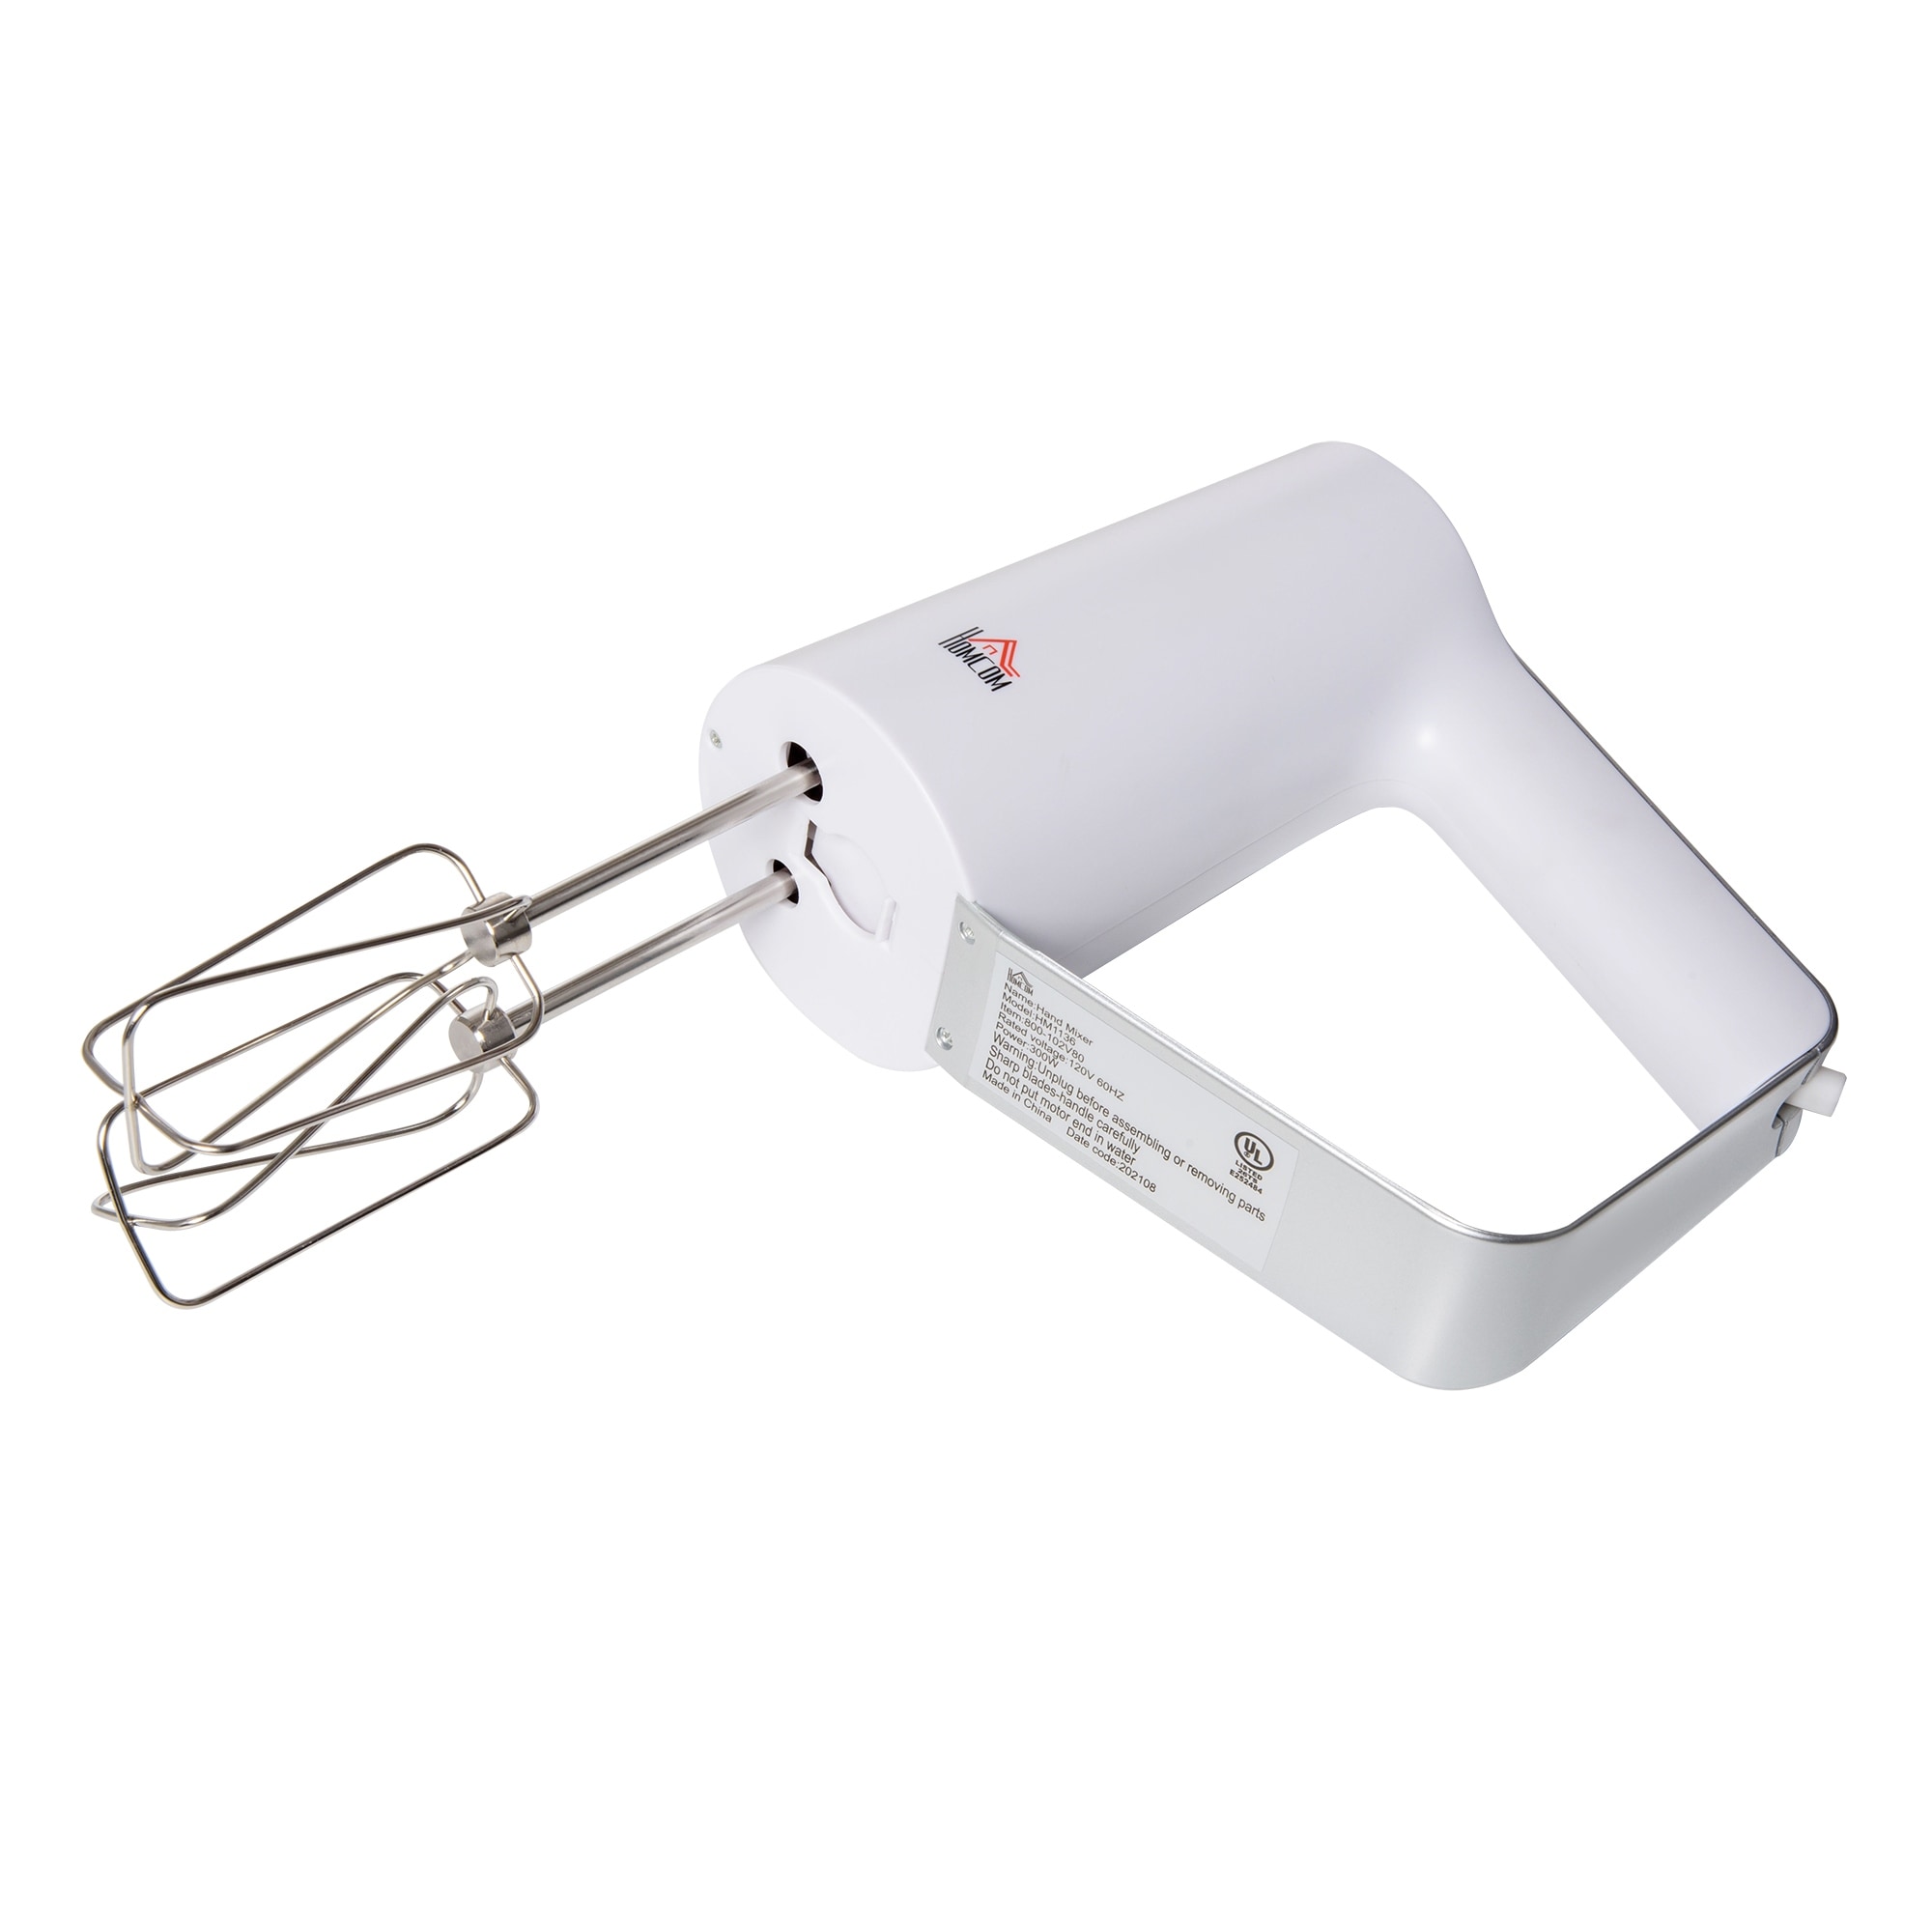 https://ak1.ostkcdn.com/images/products/is/images/direct/dbc13c2203c183645f68ec513bae0ed06565d808/HOMCOM-5-in-1-Electric-Hand-Mixer%2C-300W-Immersion-Blender-with-5-Speeds%2C-Dough-Hooks%2C-Chopper%2C-Whisk%2C-Mixers%2C-and-Measuring-Cup.jpg